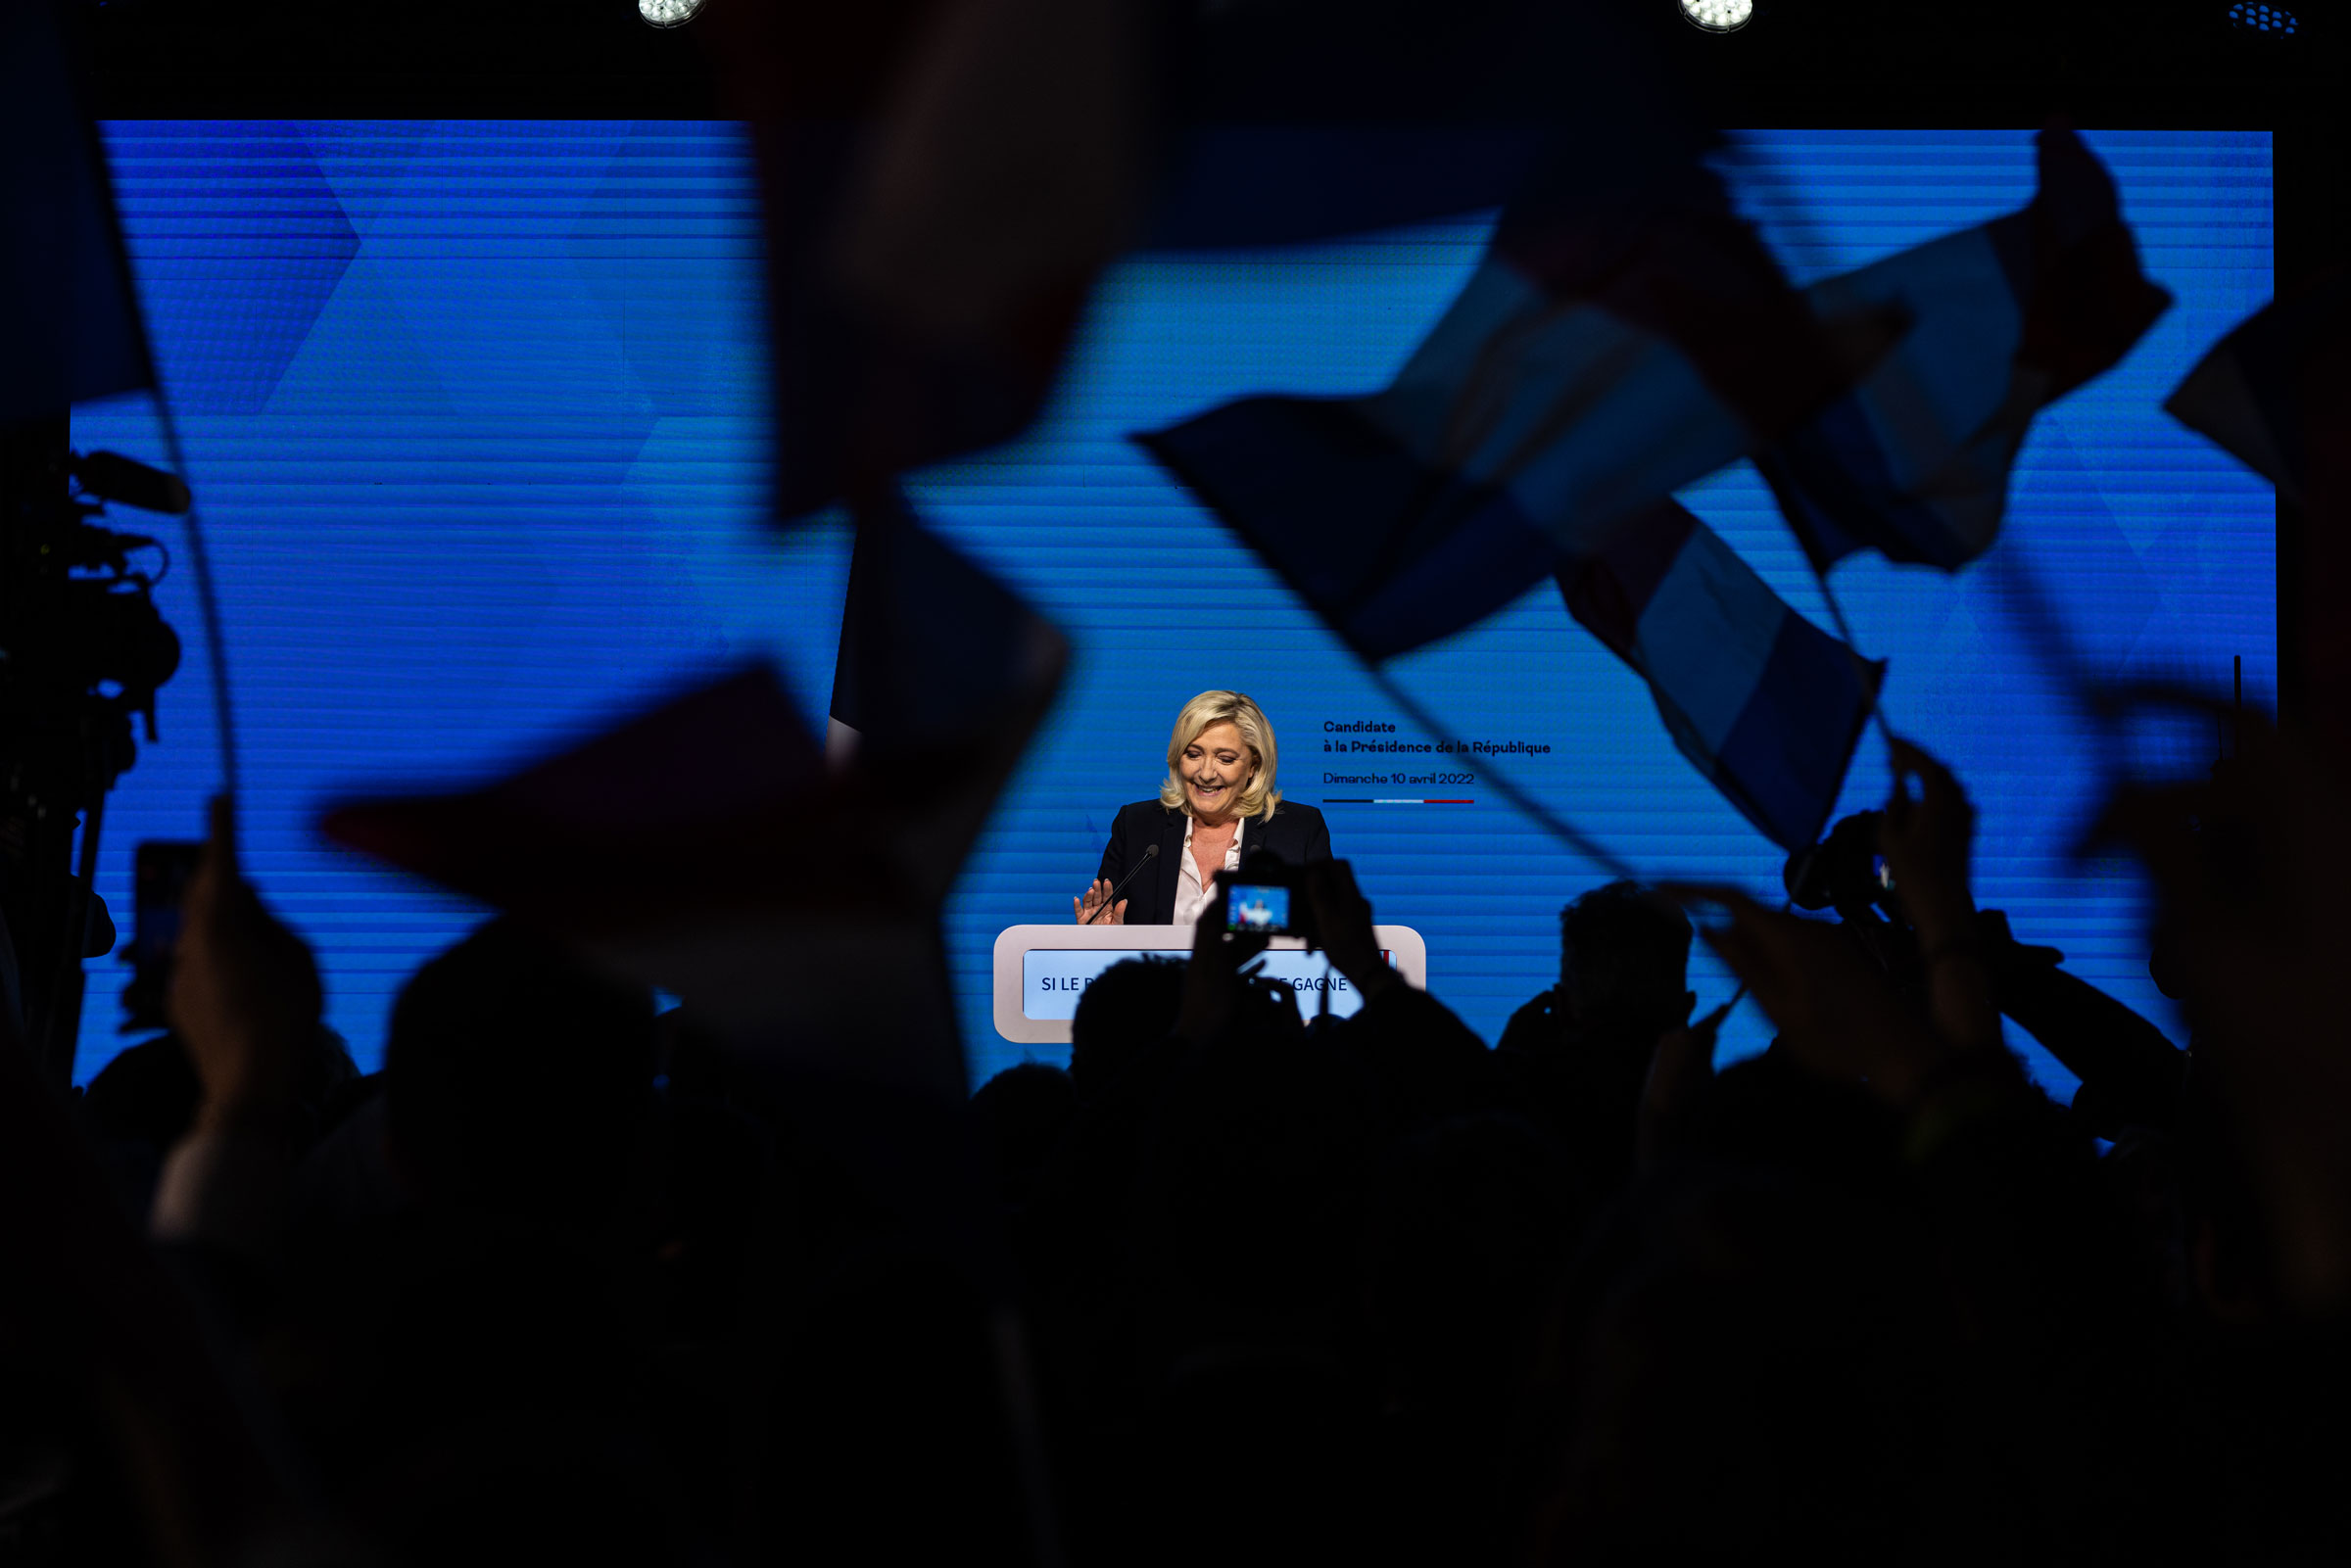 French presidential candidate Marine Le Pen speaks during an election night event after the first round of voting on April 10, 2022 in Paris, France. (Louise Delmotte—Getty Images)